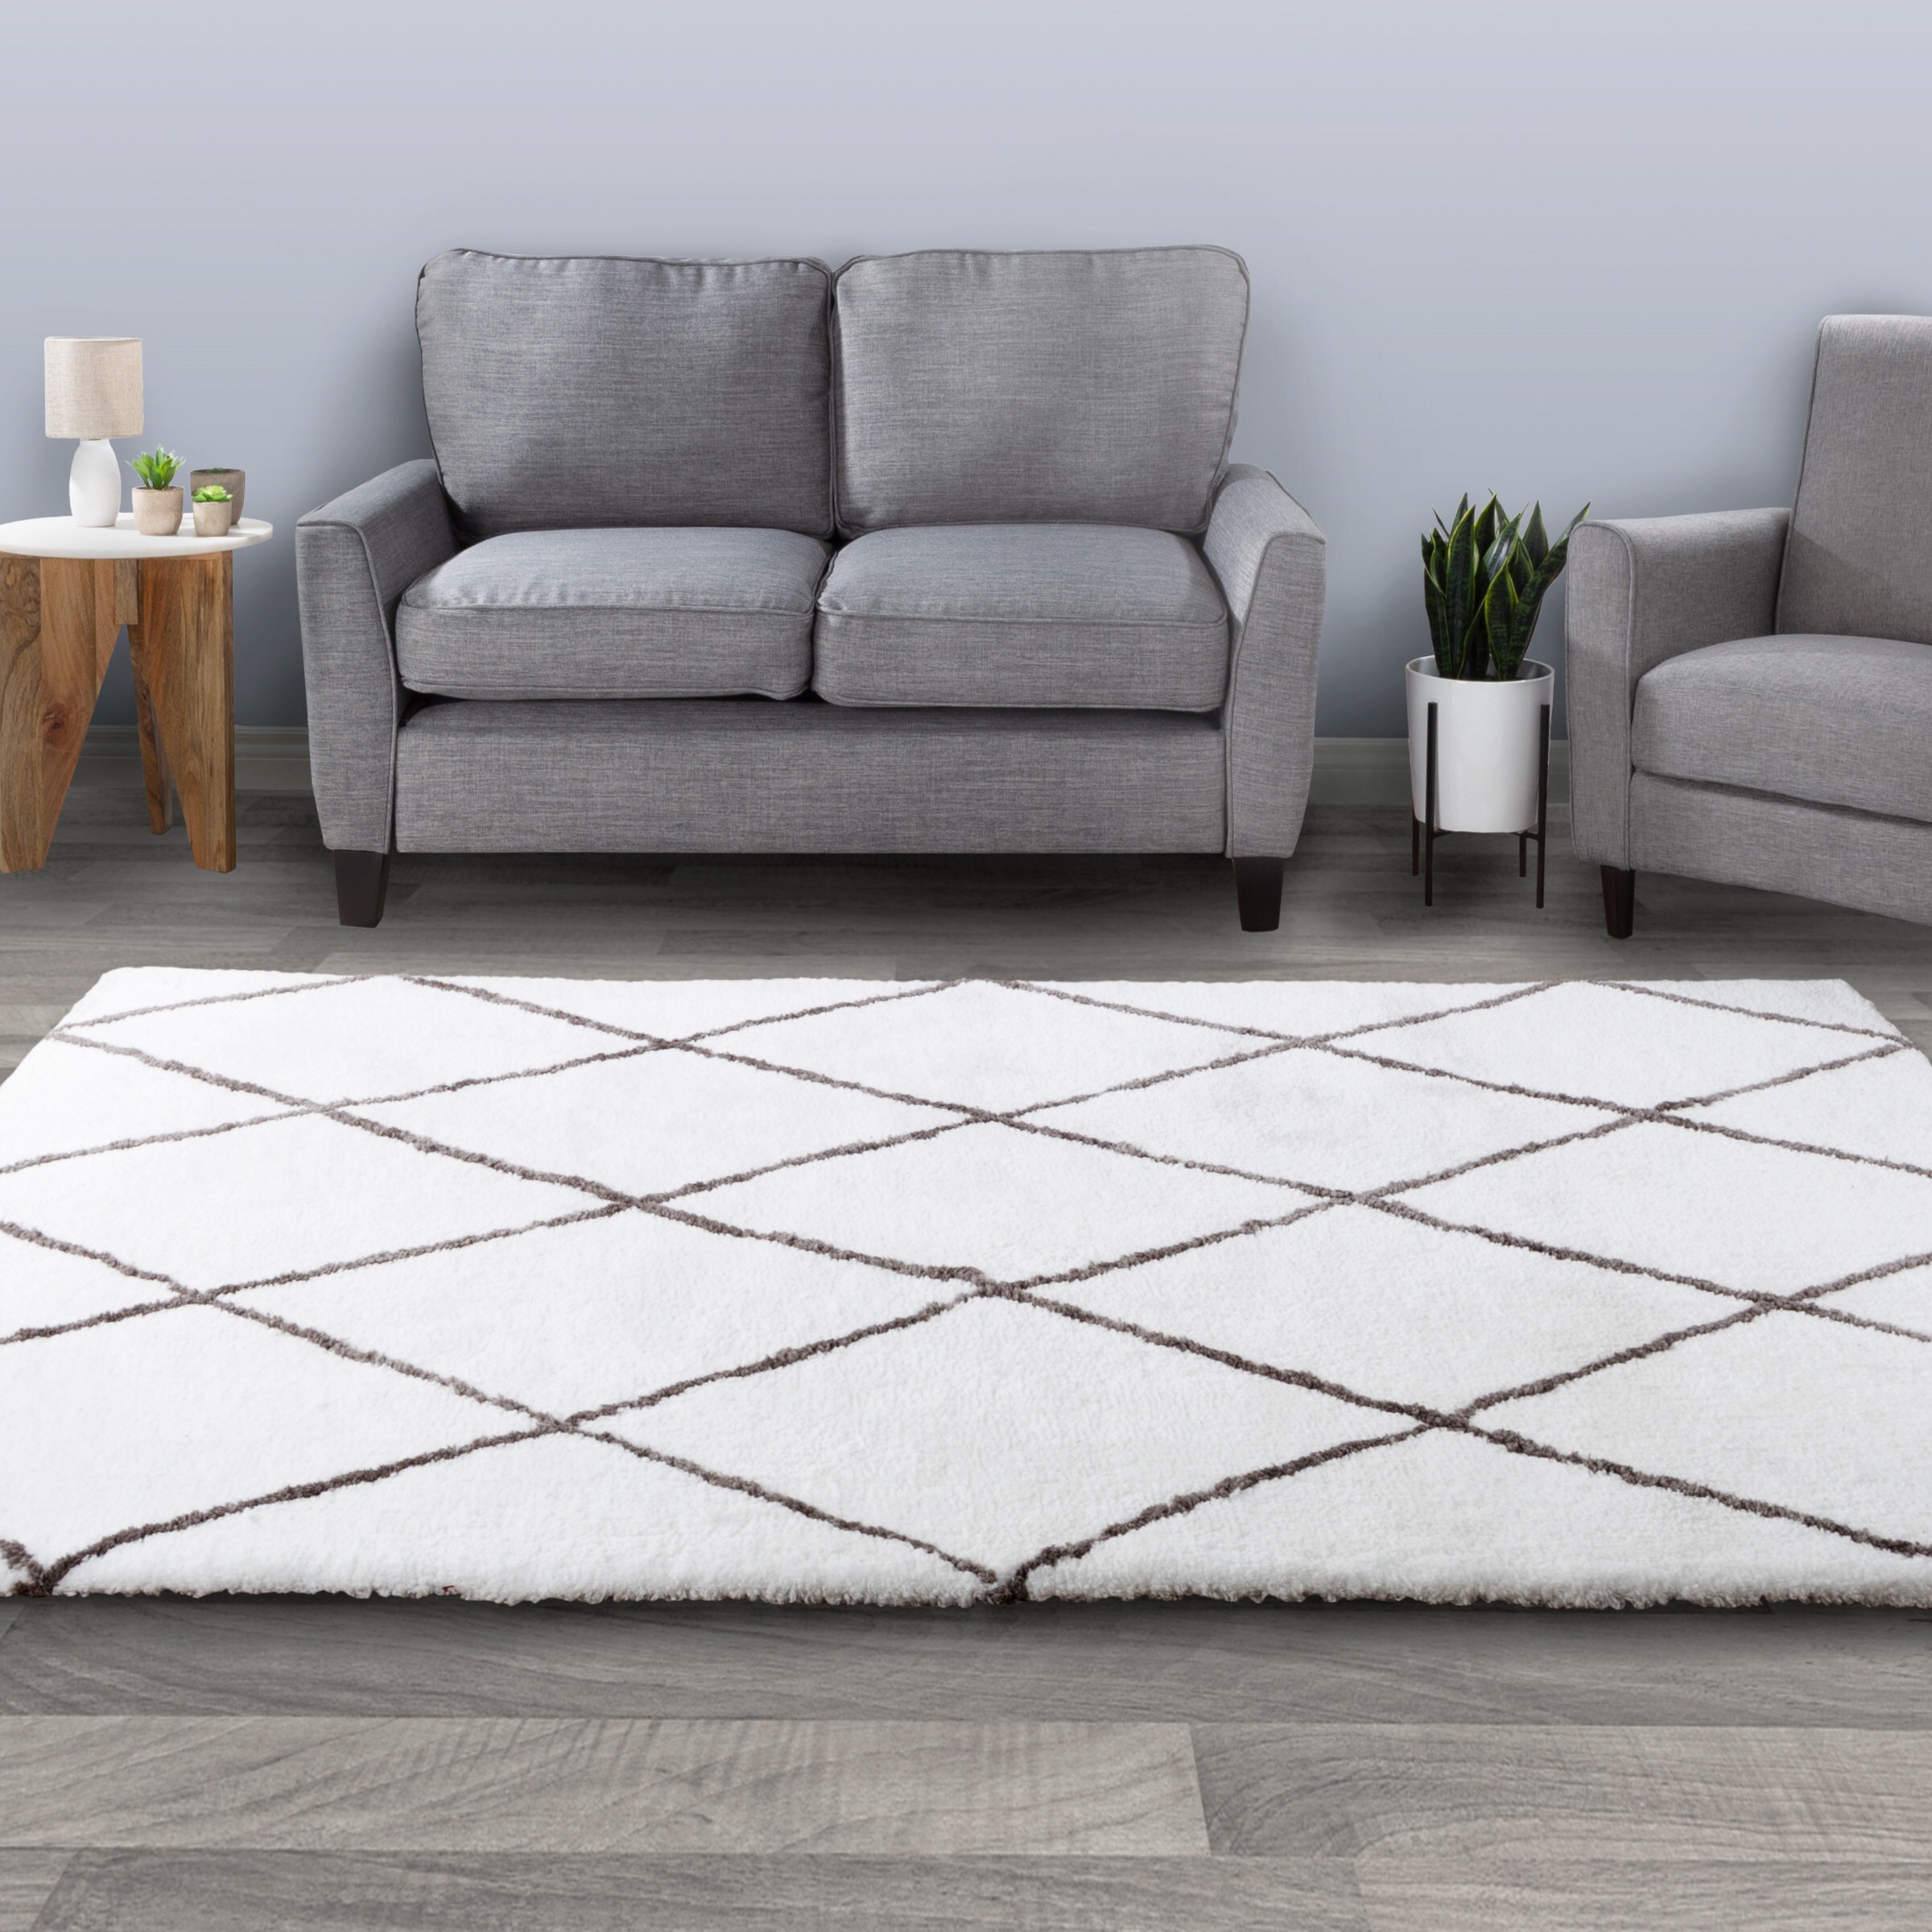 Hastings Home Rugs 8 x 10 Ivory and Gray Indoor Area Rug at Lowes.com